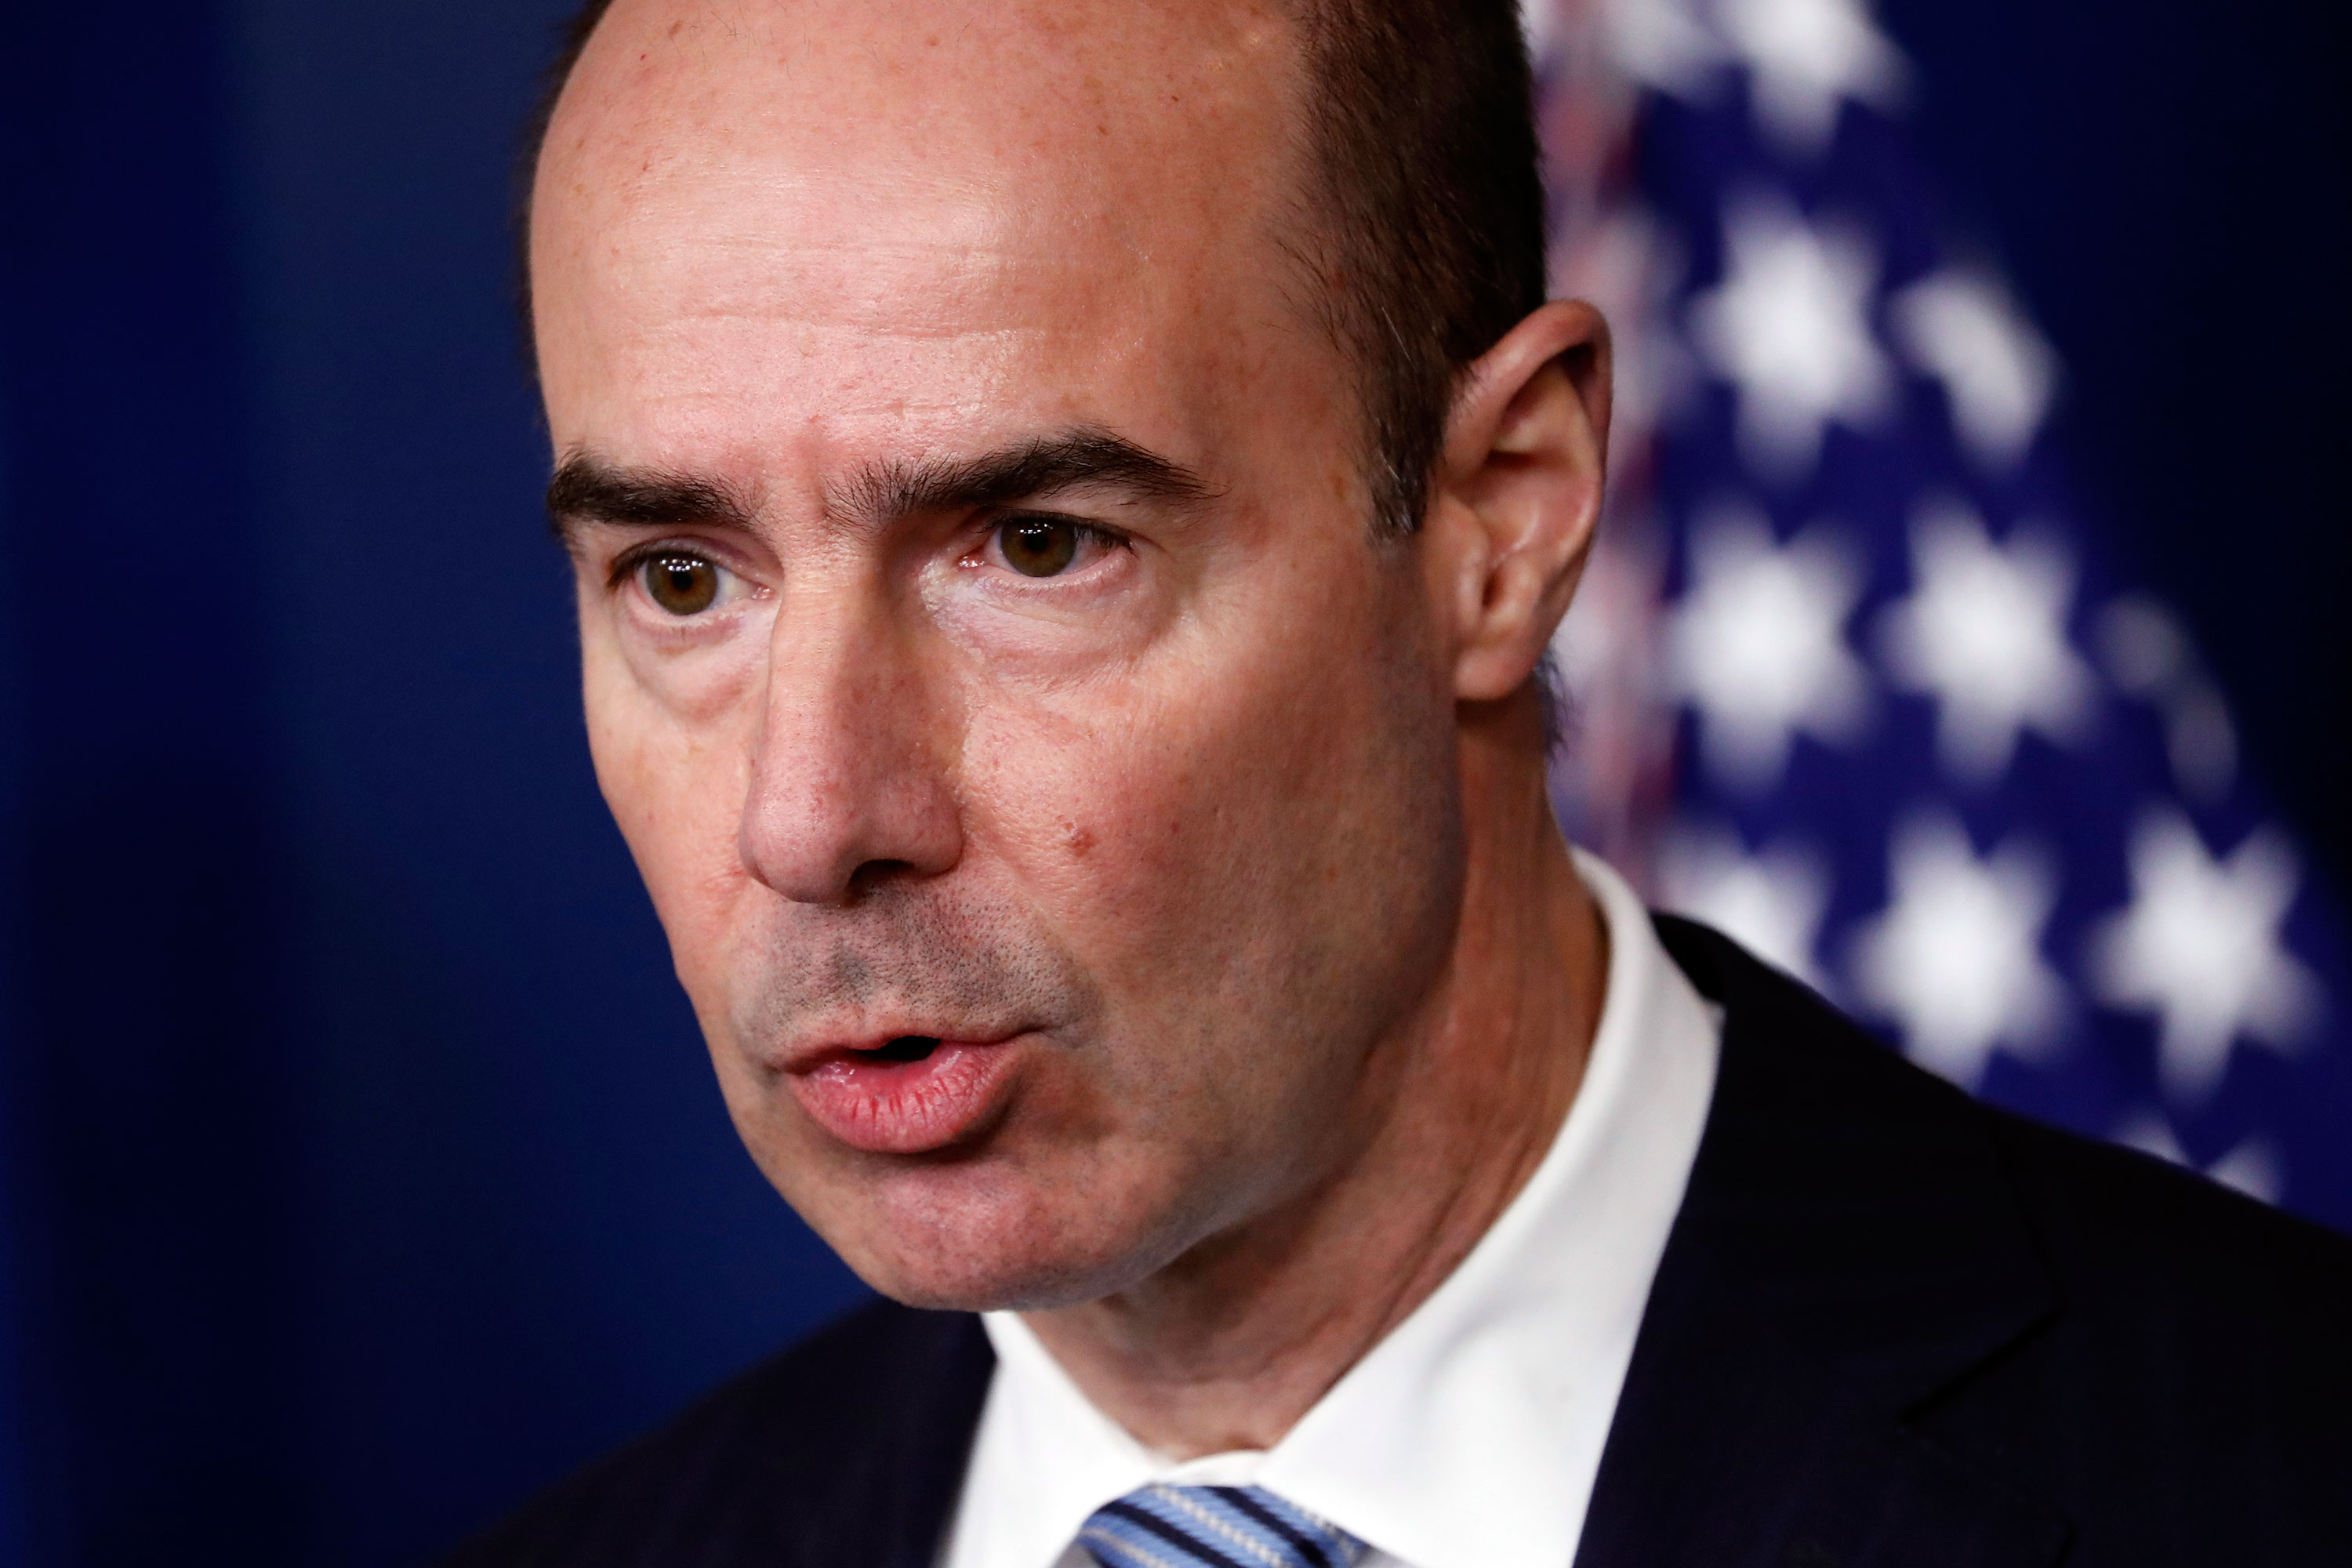 Labor Secretary Eugene Scalia speaks about the coronavirus in the James Brady Press Briefing Room of the White House on April 9.